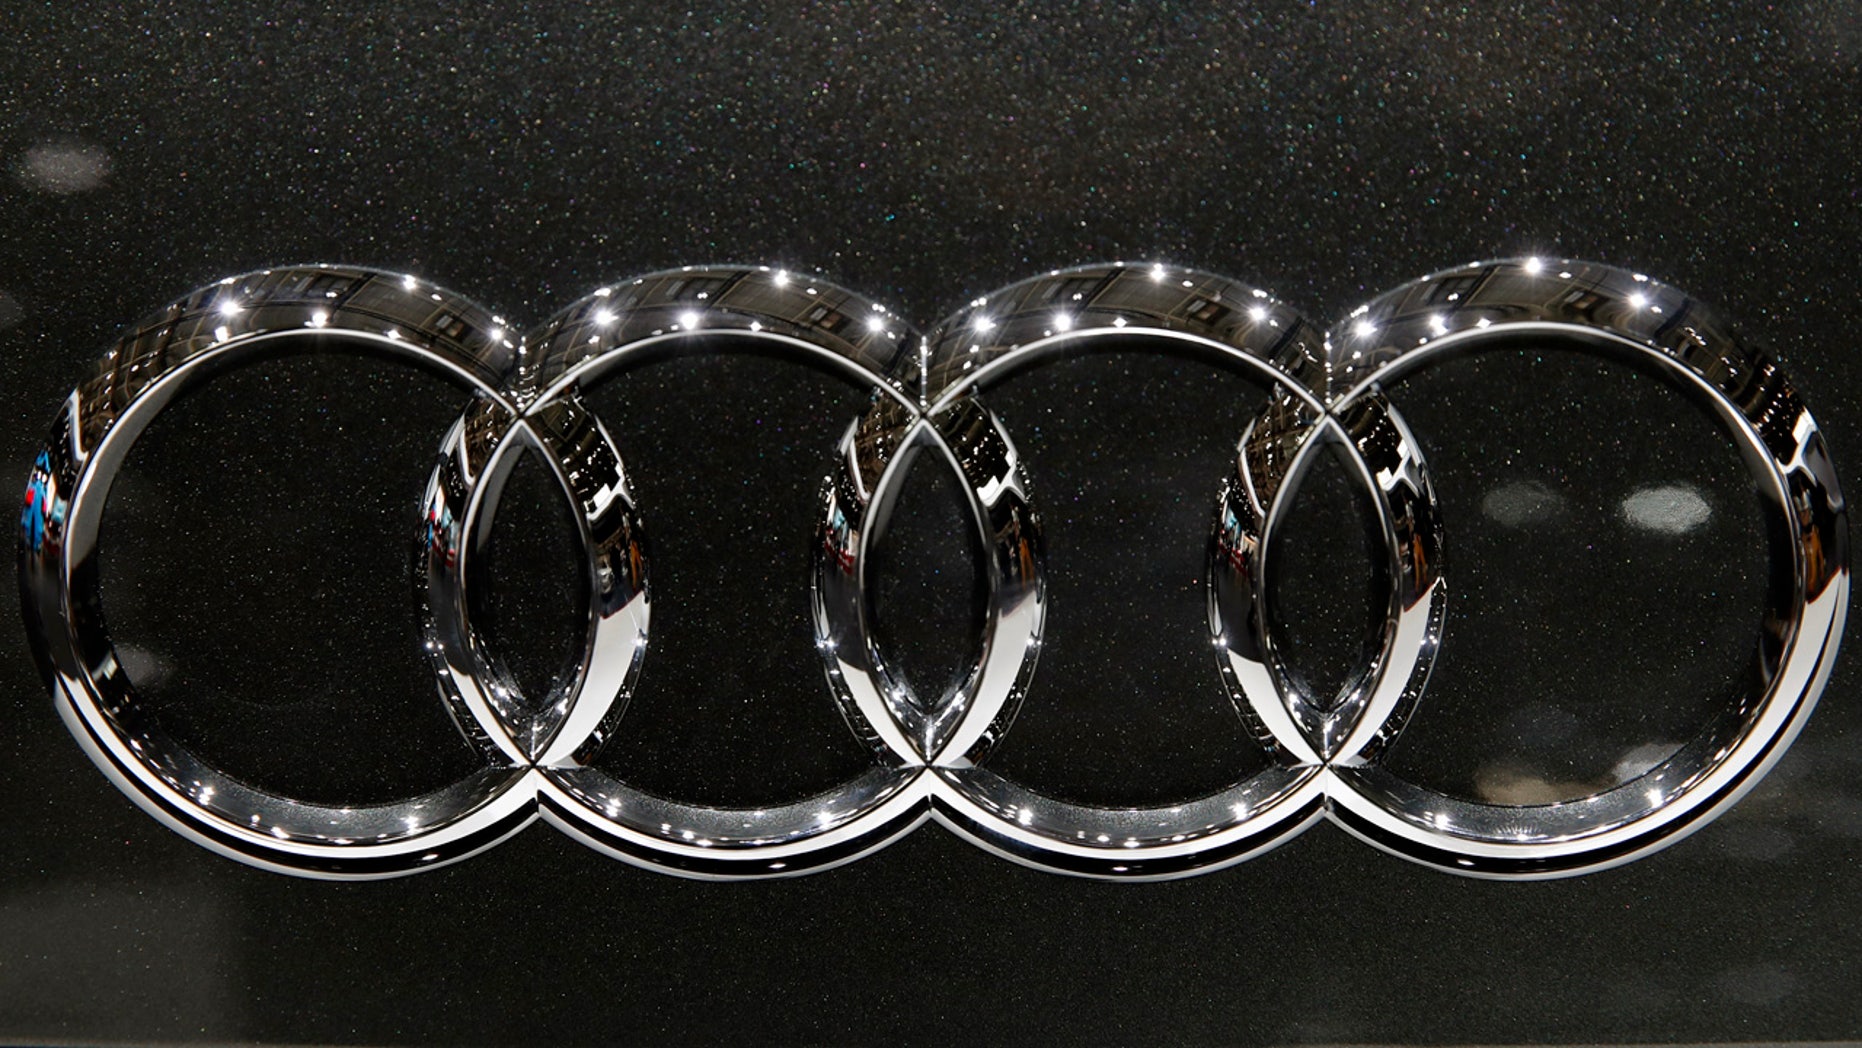 Four Audi managers indicted in emissions cheating scandal